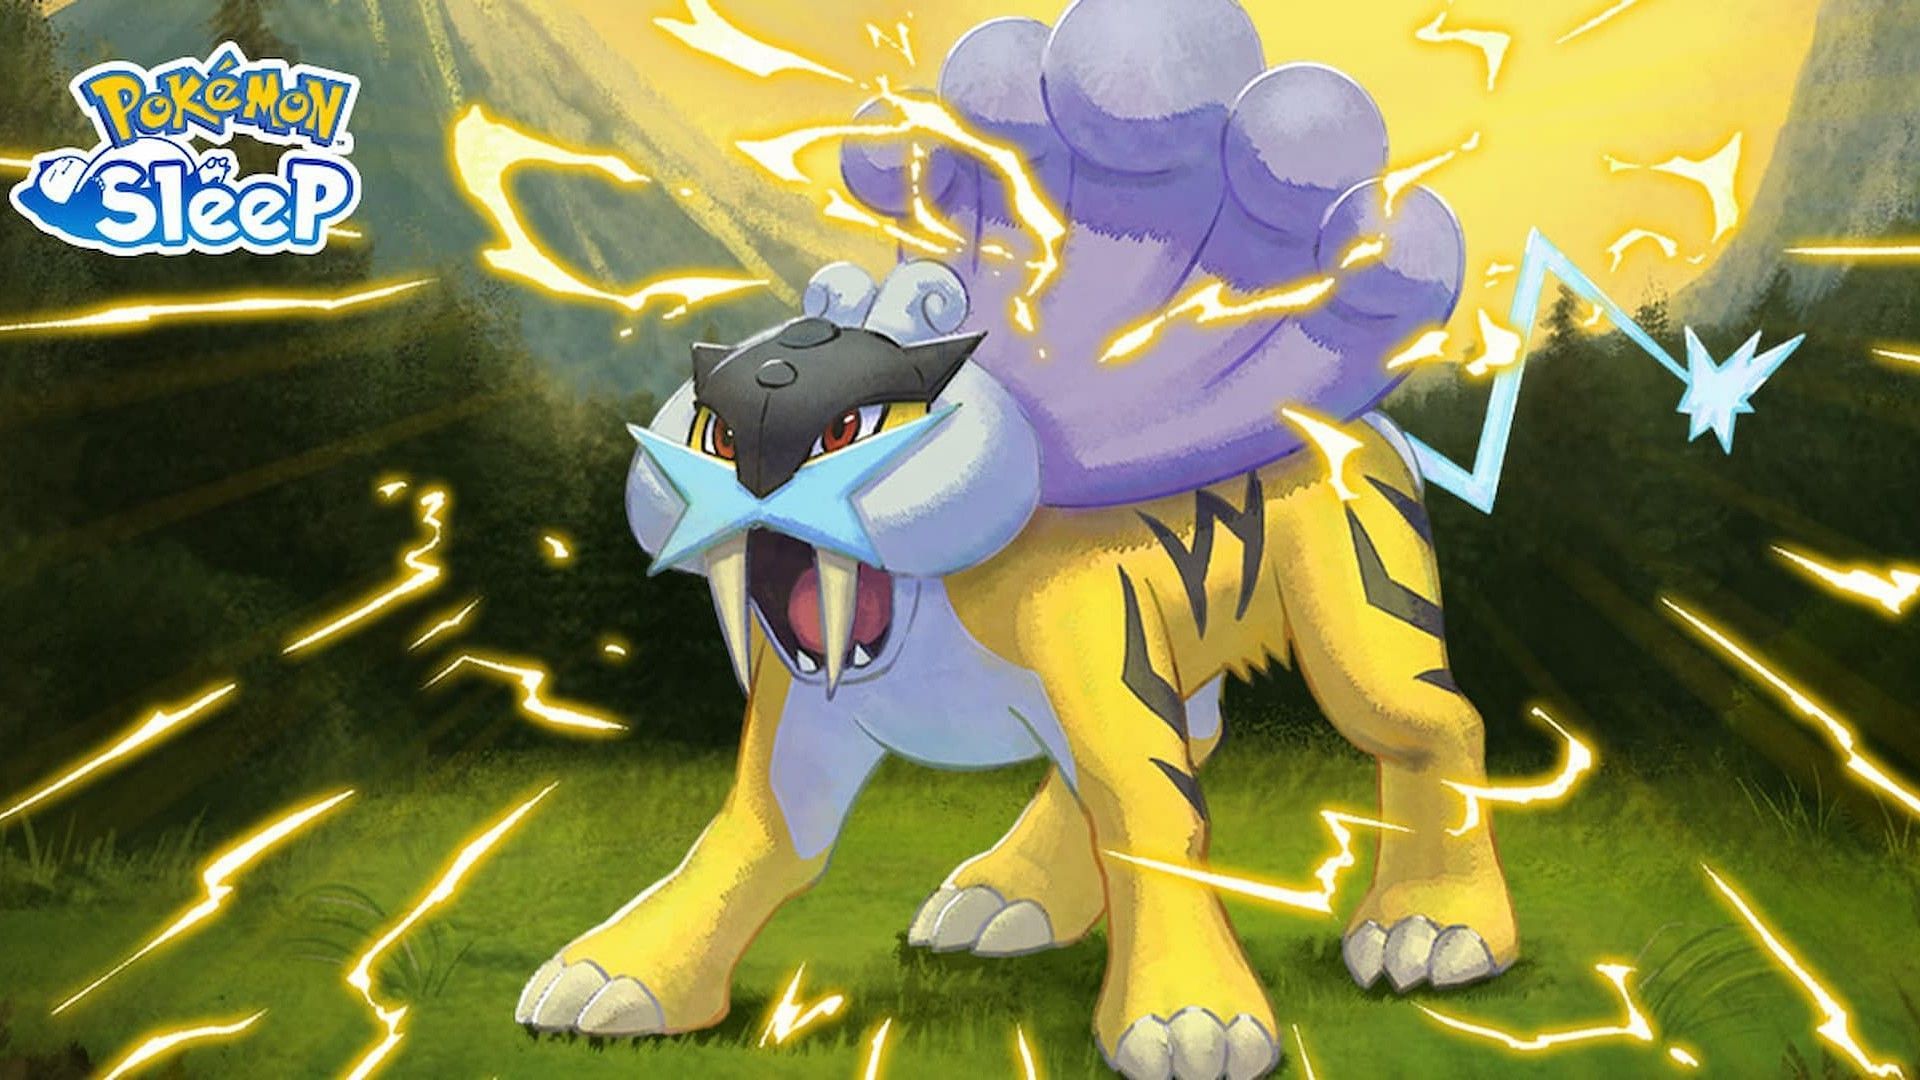 Pokemon Sleep Raikou Research event: Schedule, guide, and more